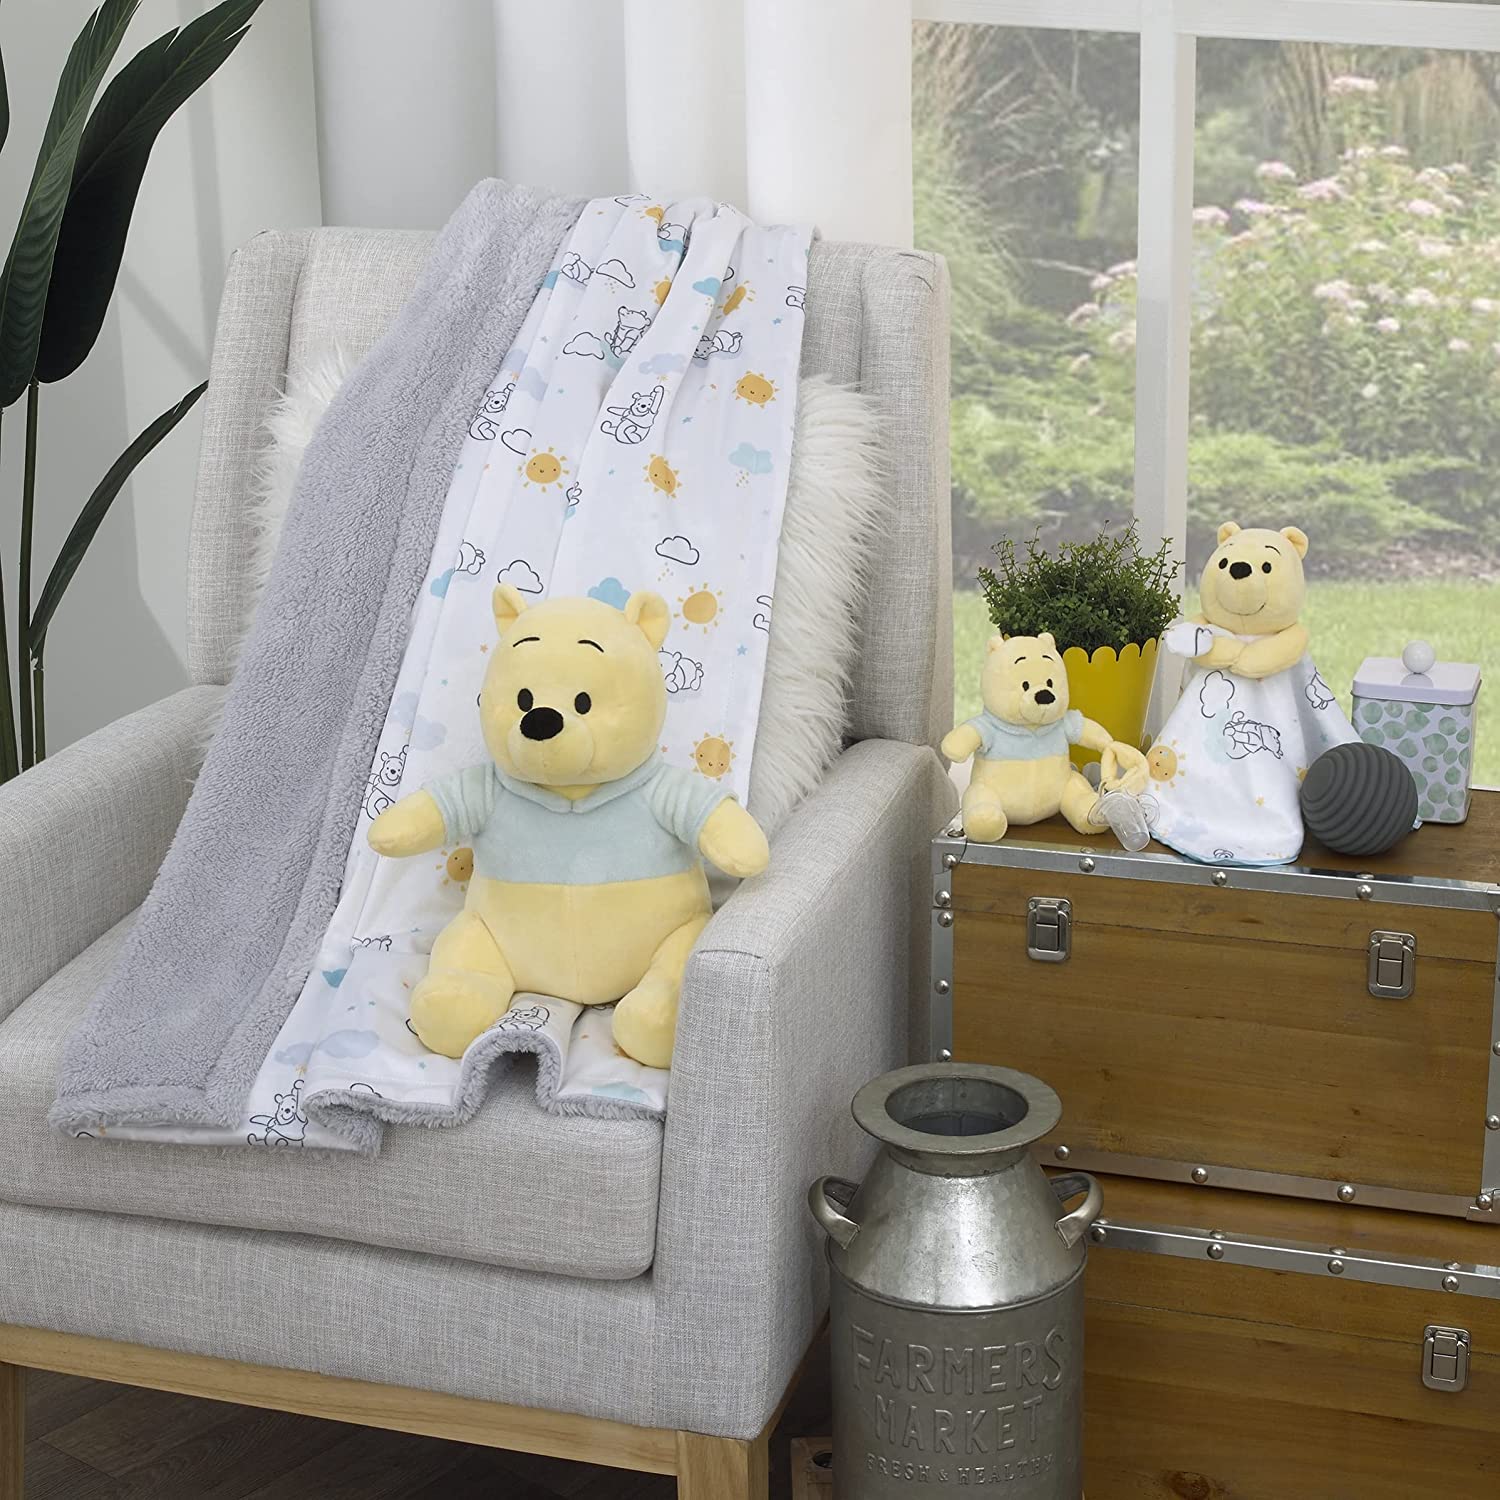 Disney Winnie The Pooh White, Yellow, and Aqua Cloud and Sun Lovey Security Blanket - image 5 of 5